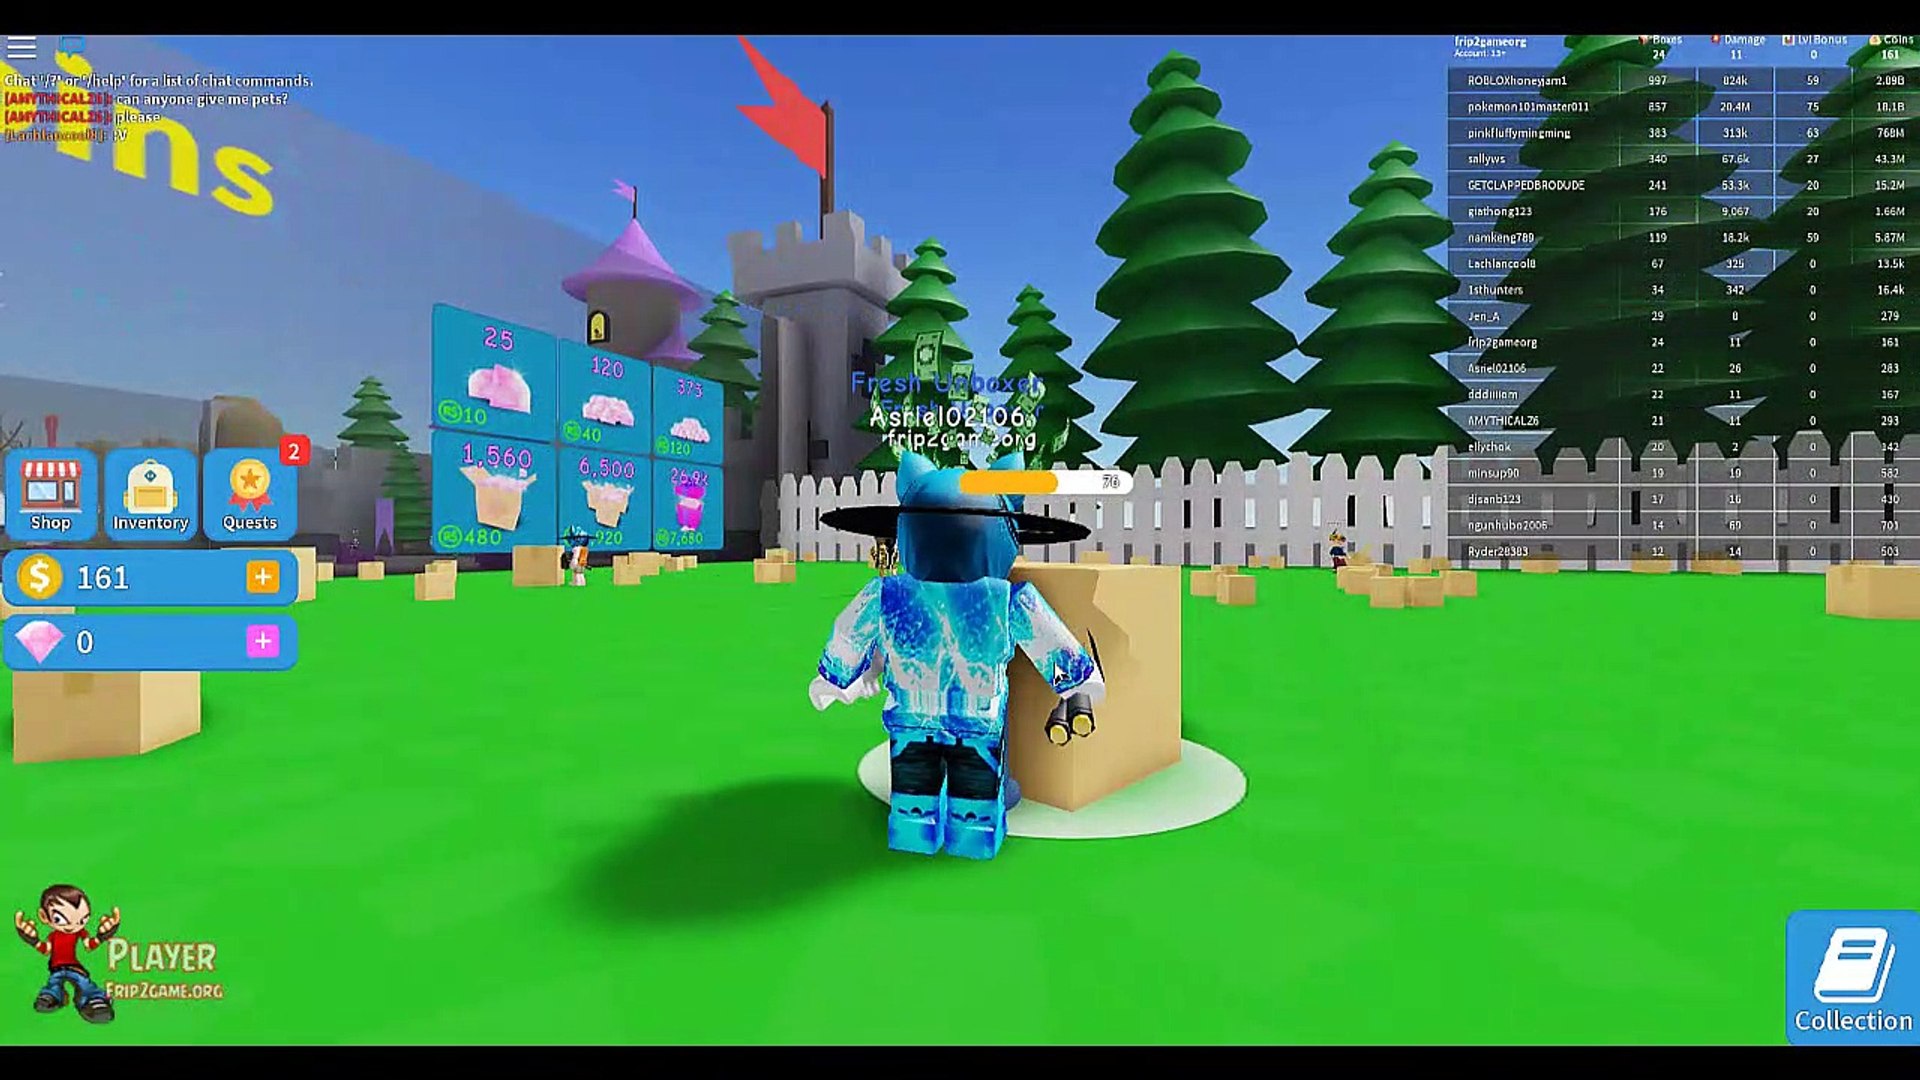 Video Unboxing Simulator New Game Of Roblox Video Dailymotion - roblox ripull mega games youtube